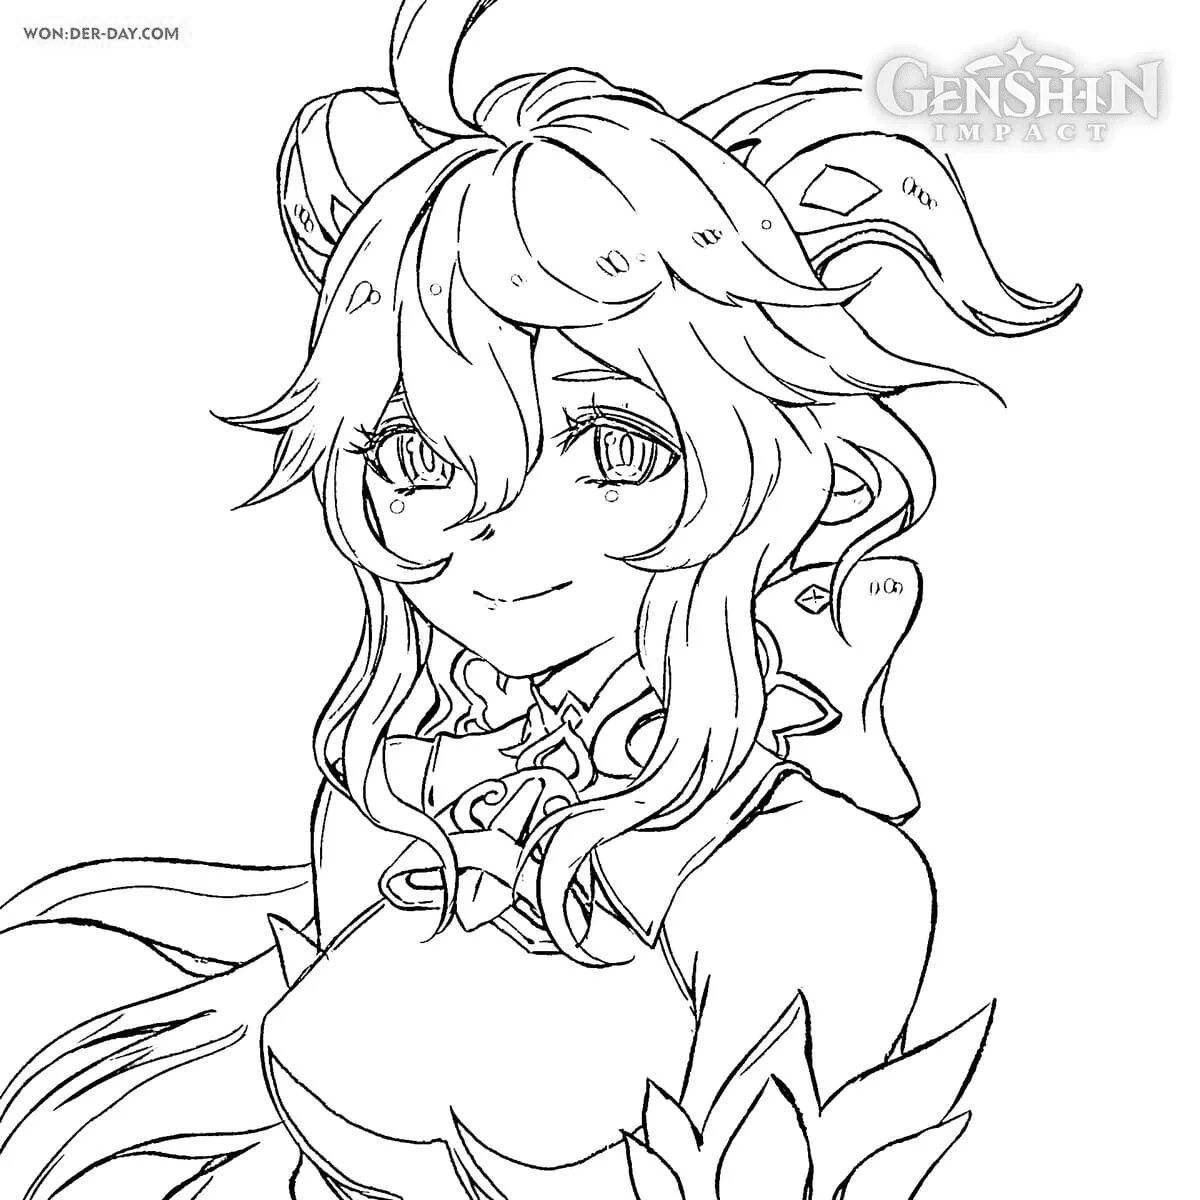 Genshin impact funny characters coloring page